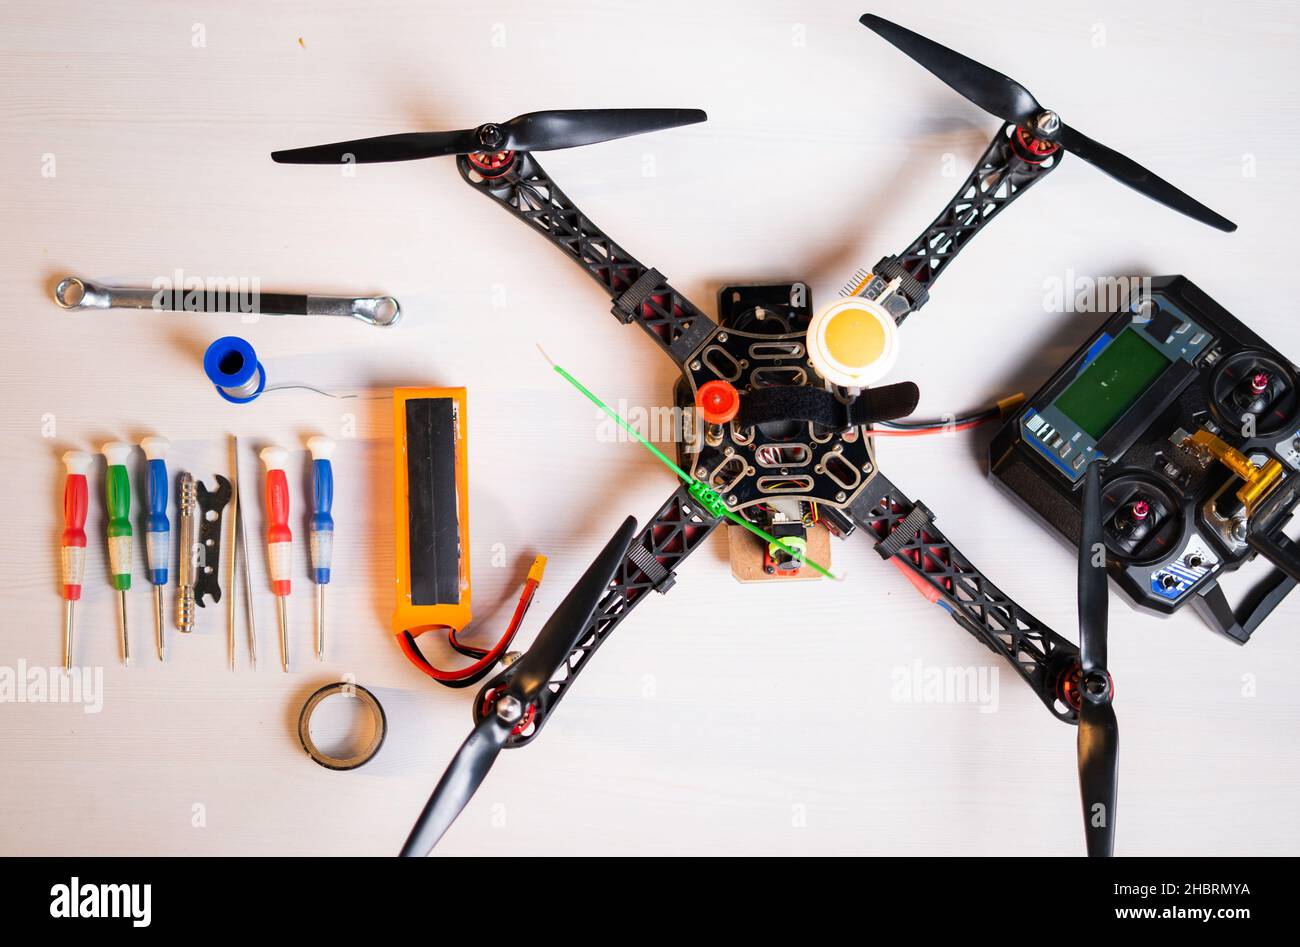 disassembled drone or uav parts and repaur tools on table at workshop -  concept of quadcopter making, DIY drone making and assembly Stock Photo -  Alamy